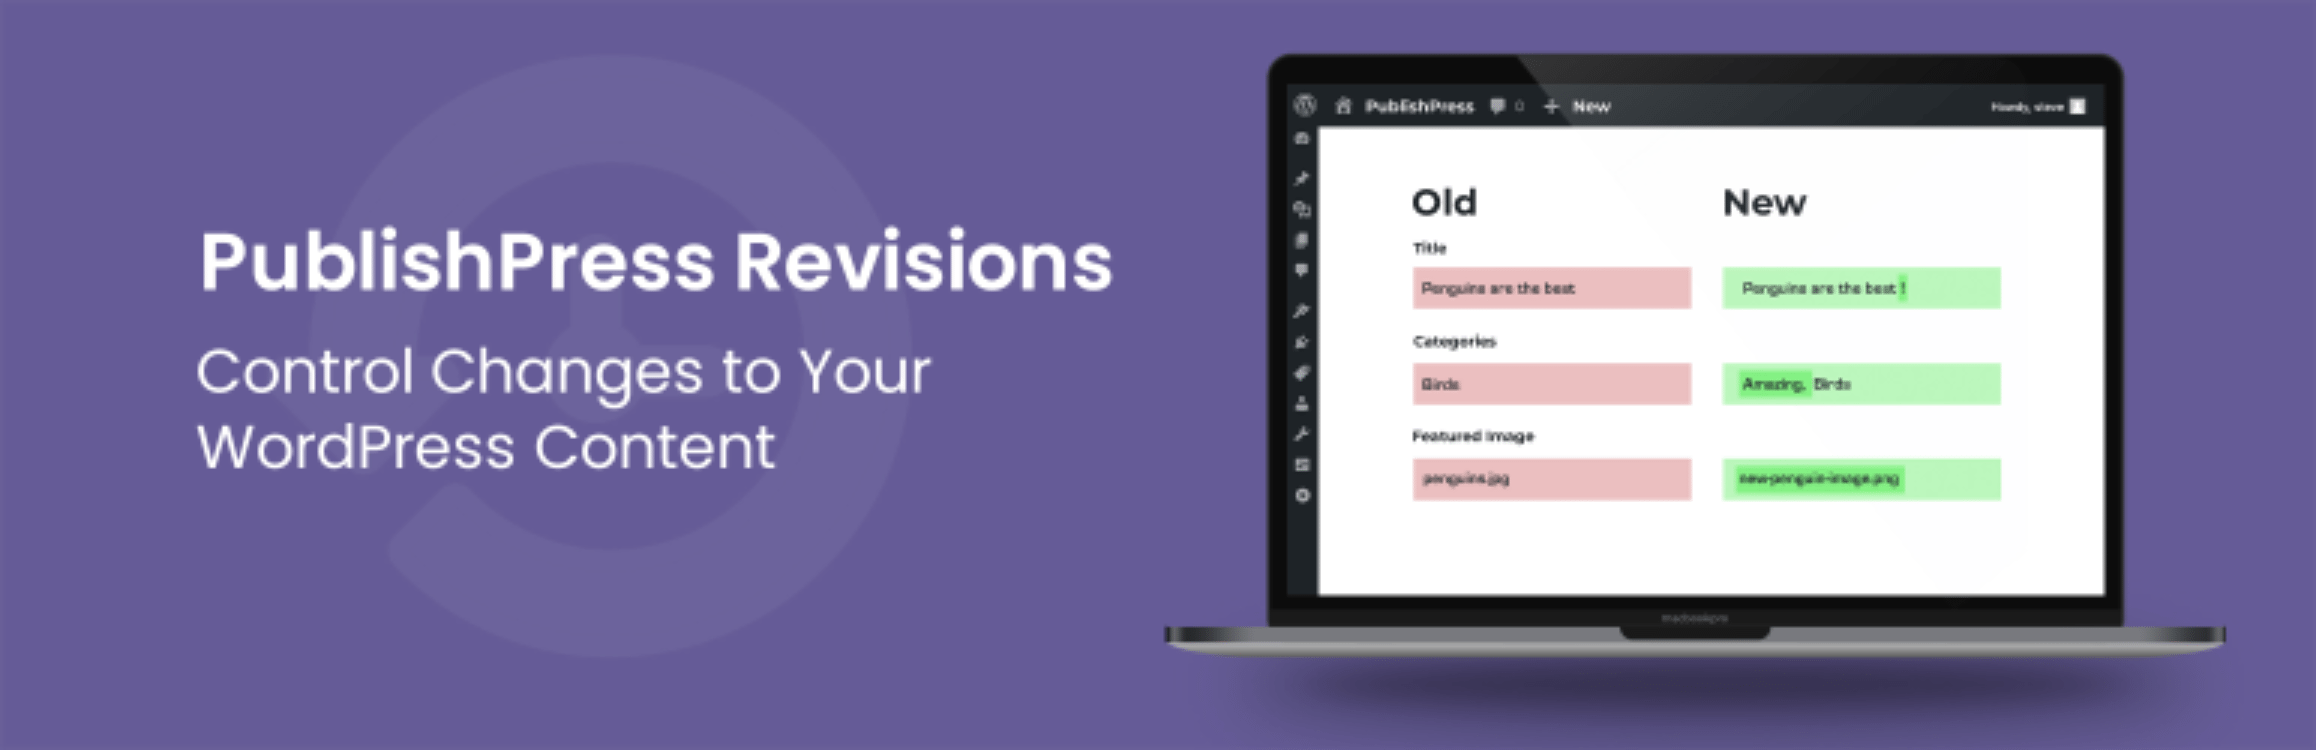 PublishPress Revisions: Duplicate Posts, Submit, Approve and Schedule Content Changes